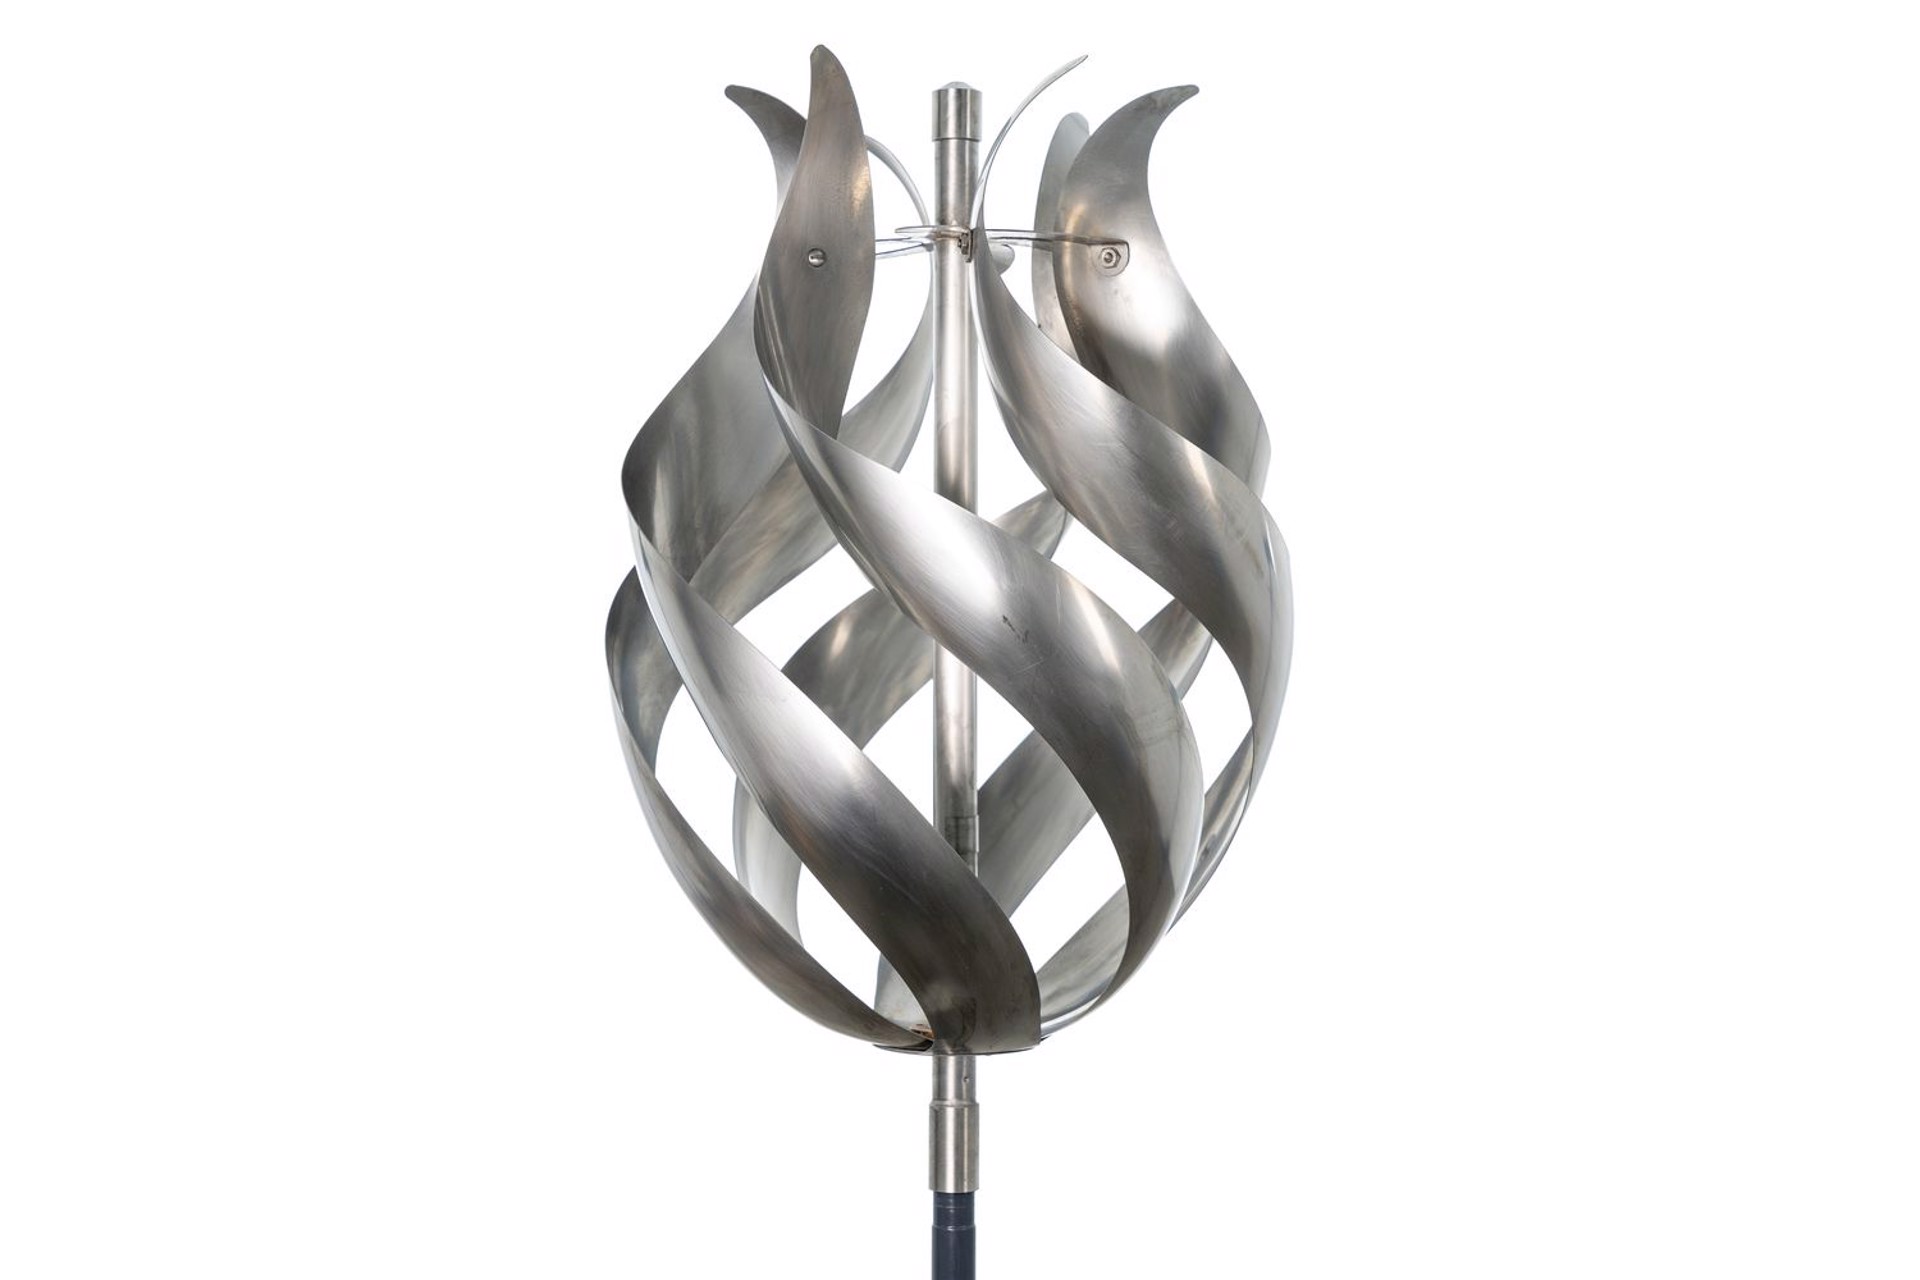 Stainless Steal - Tulip by Lyman Whitaker